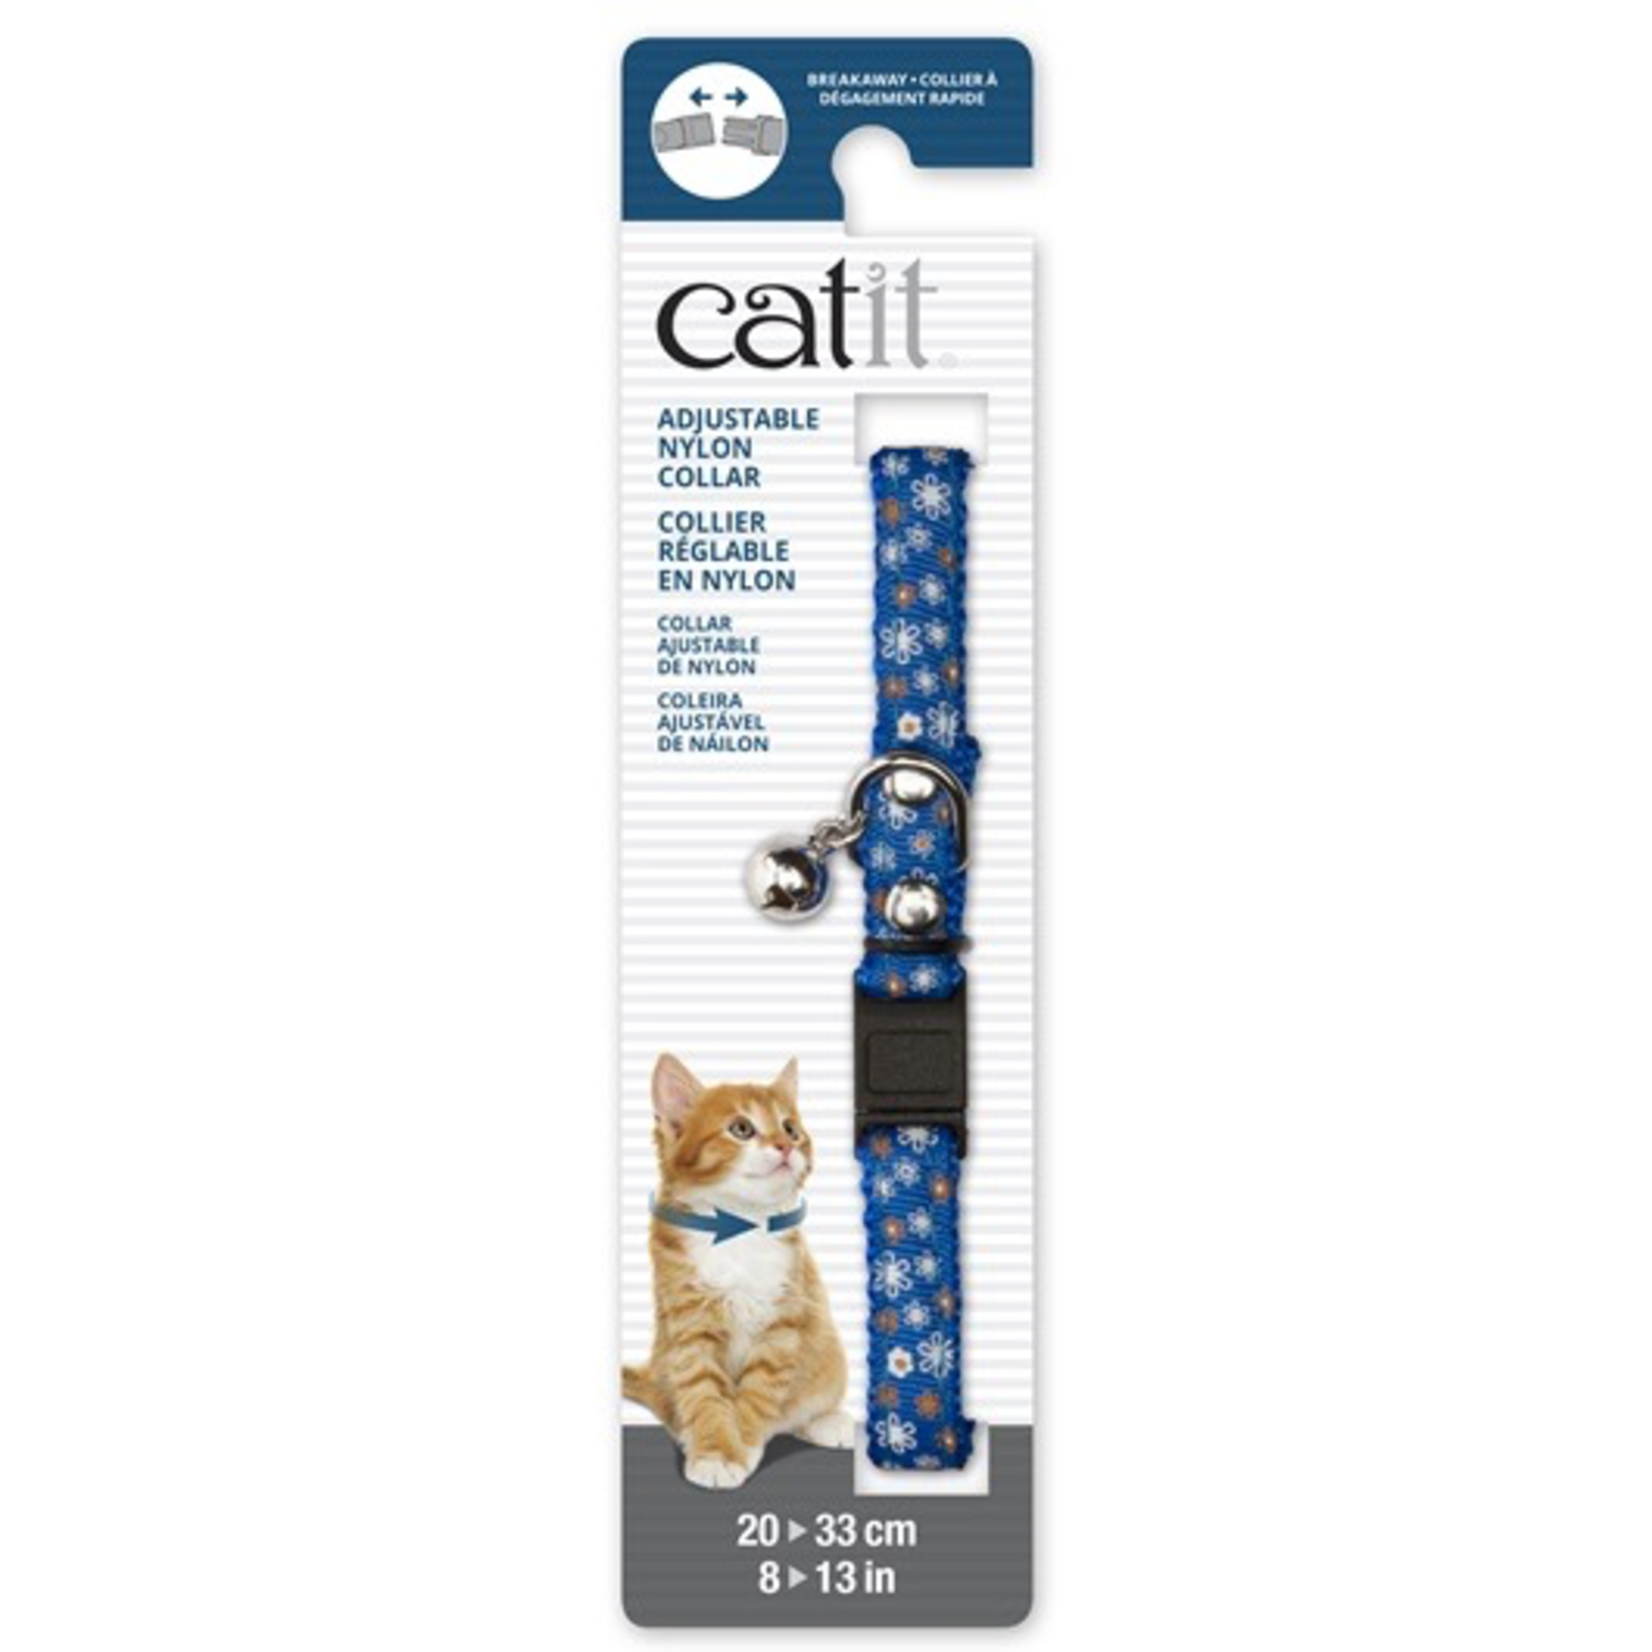 CAT IT Catit Adjustable Breakaway Nylon Collar with Rivets - Blue with Flowers - 20-33 cm (8-13 in)